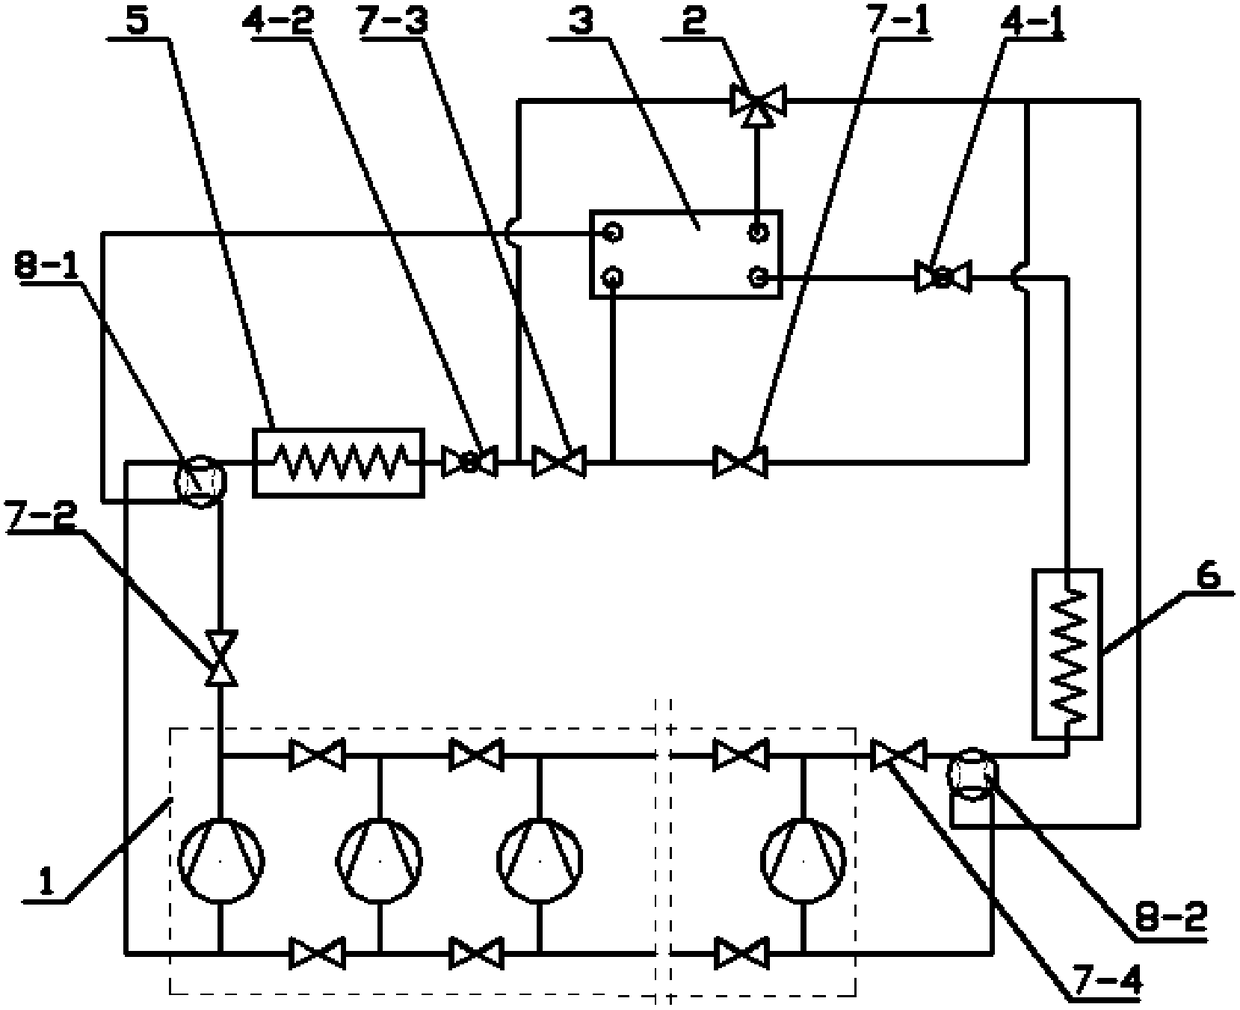 Multi-cycle variable-flow heat pump system